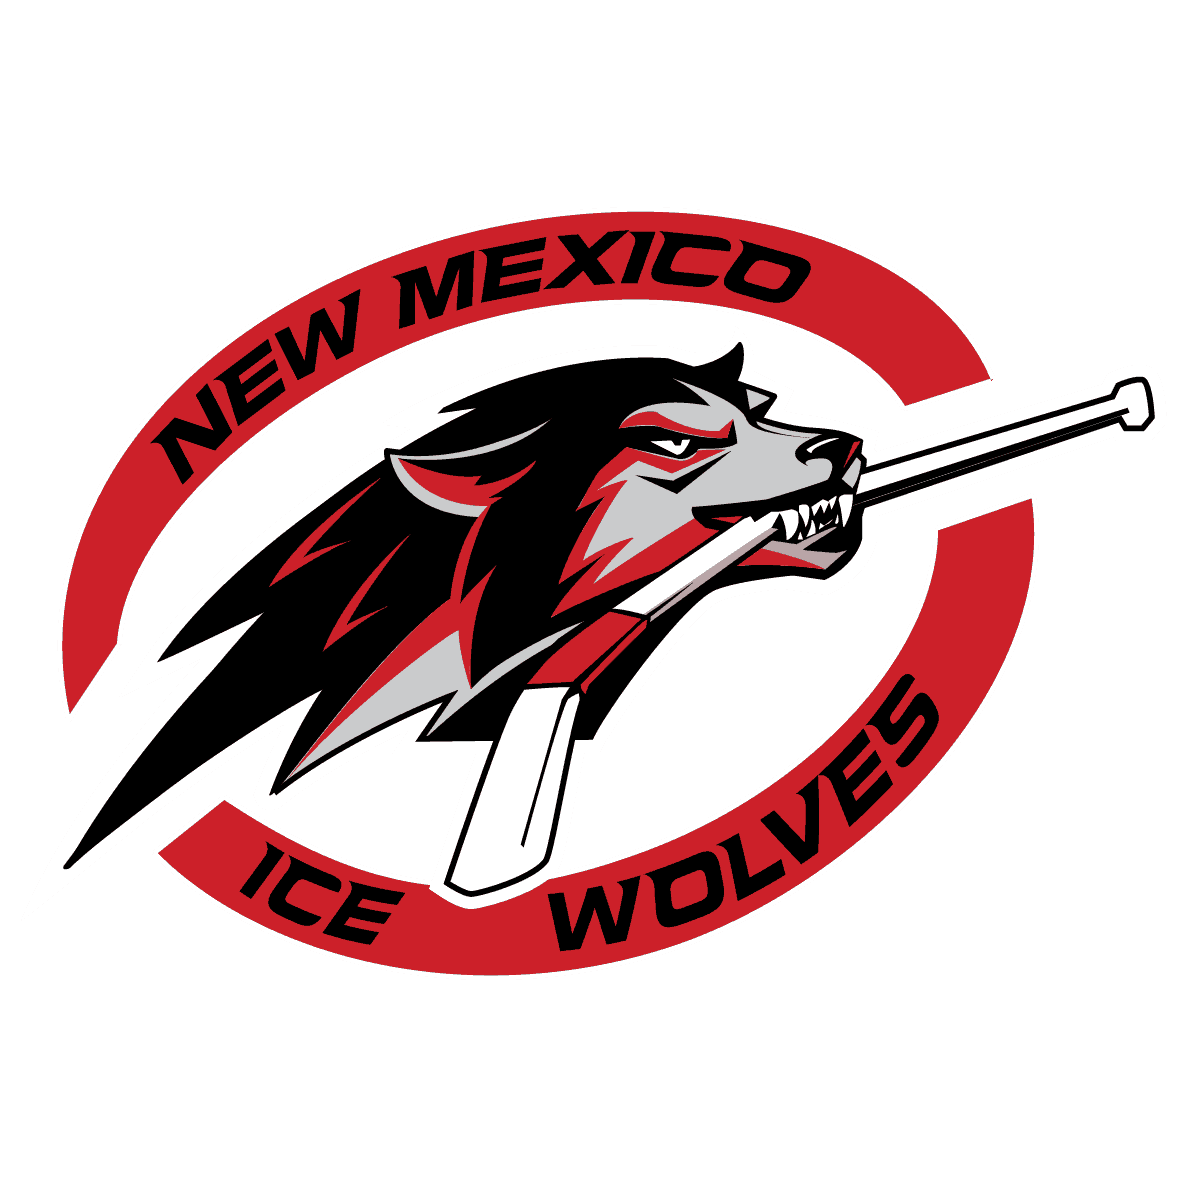 Newest Game at the Outpost Lets You Play for the Ice Wolves! - NEW MEXICO  ICE WOLVES